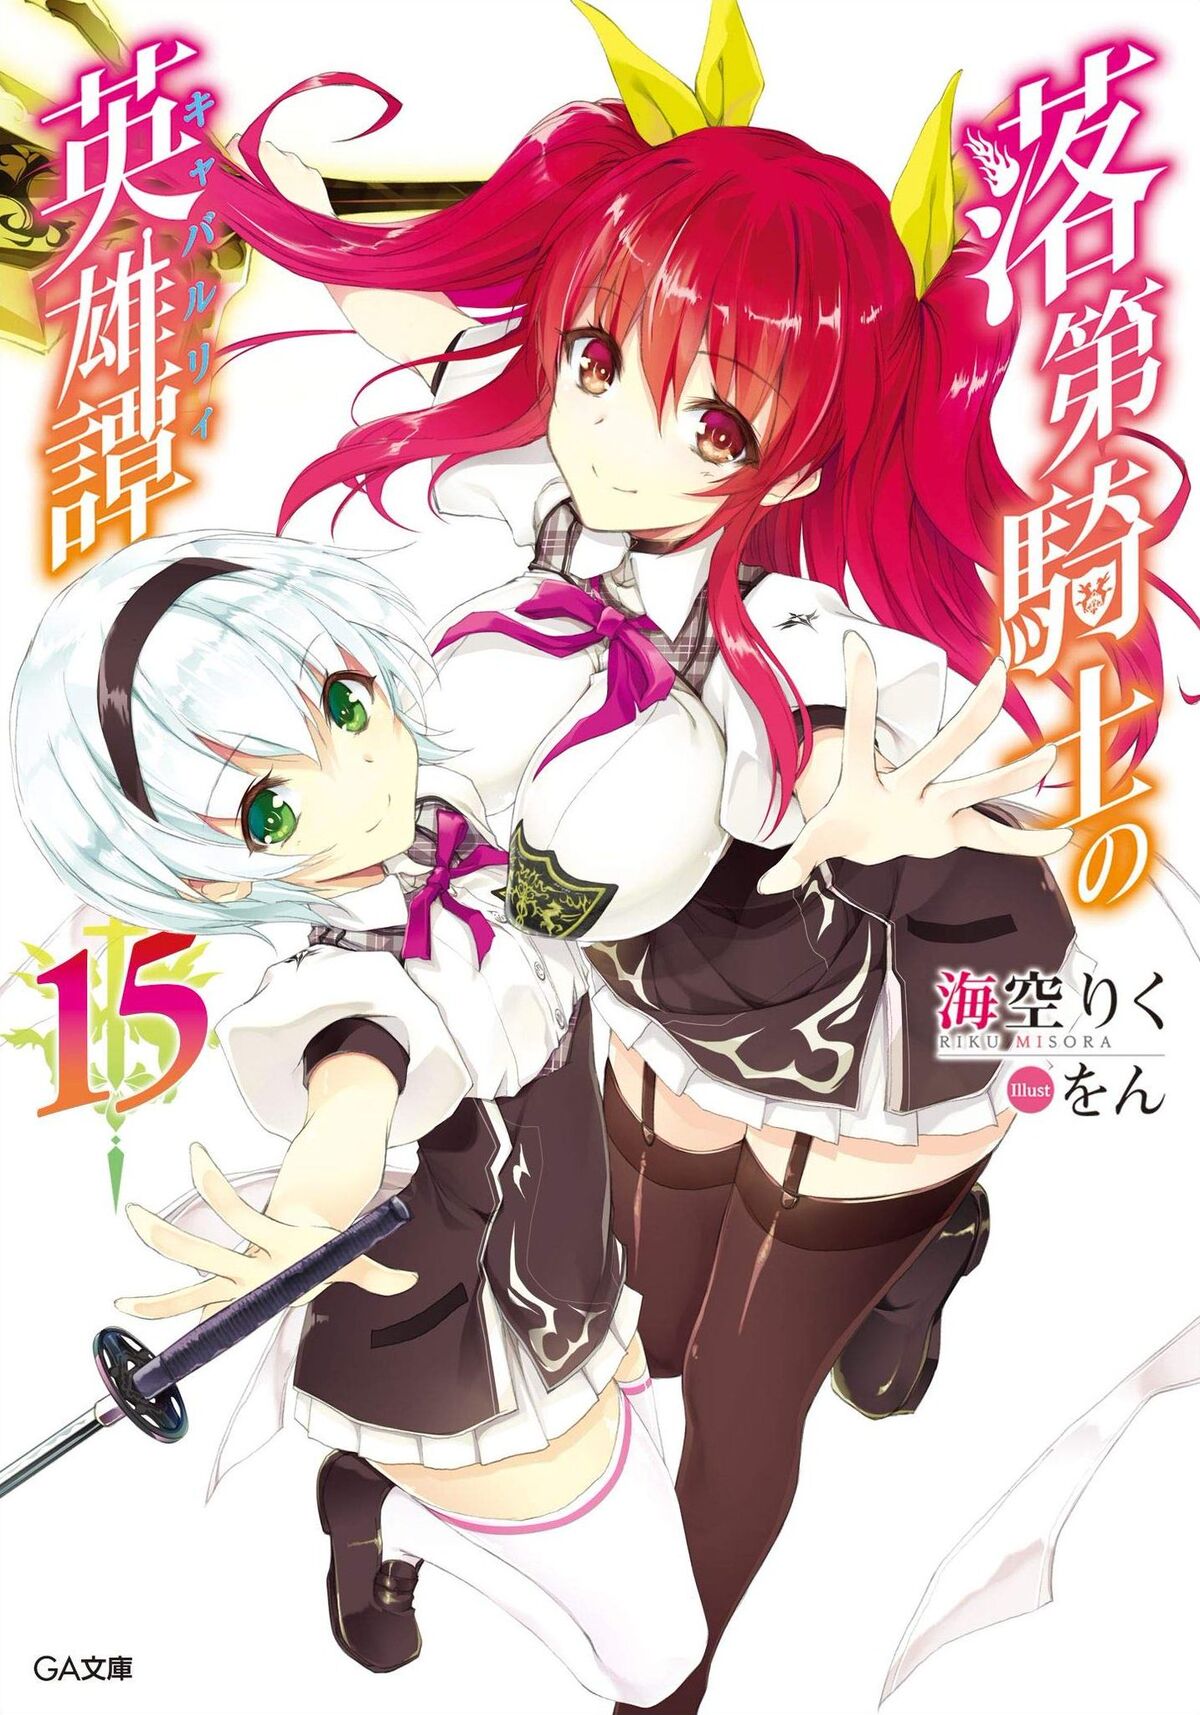 Does anyone know if there will be a second season of Rakudai Kishi